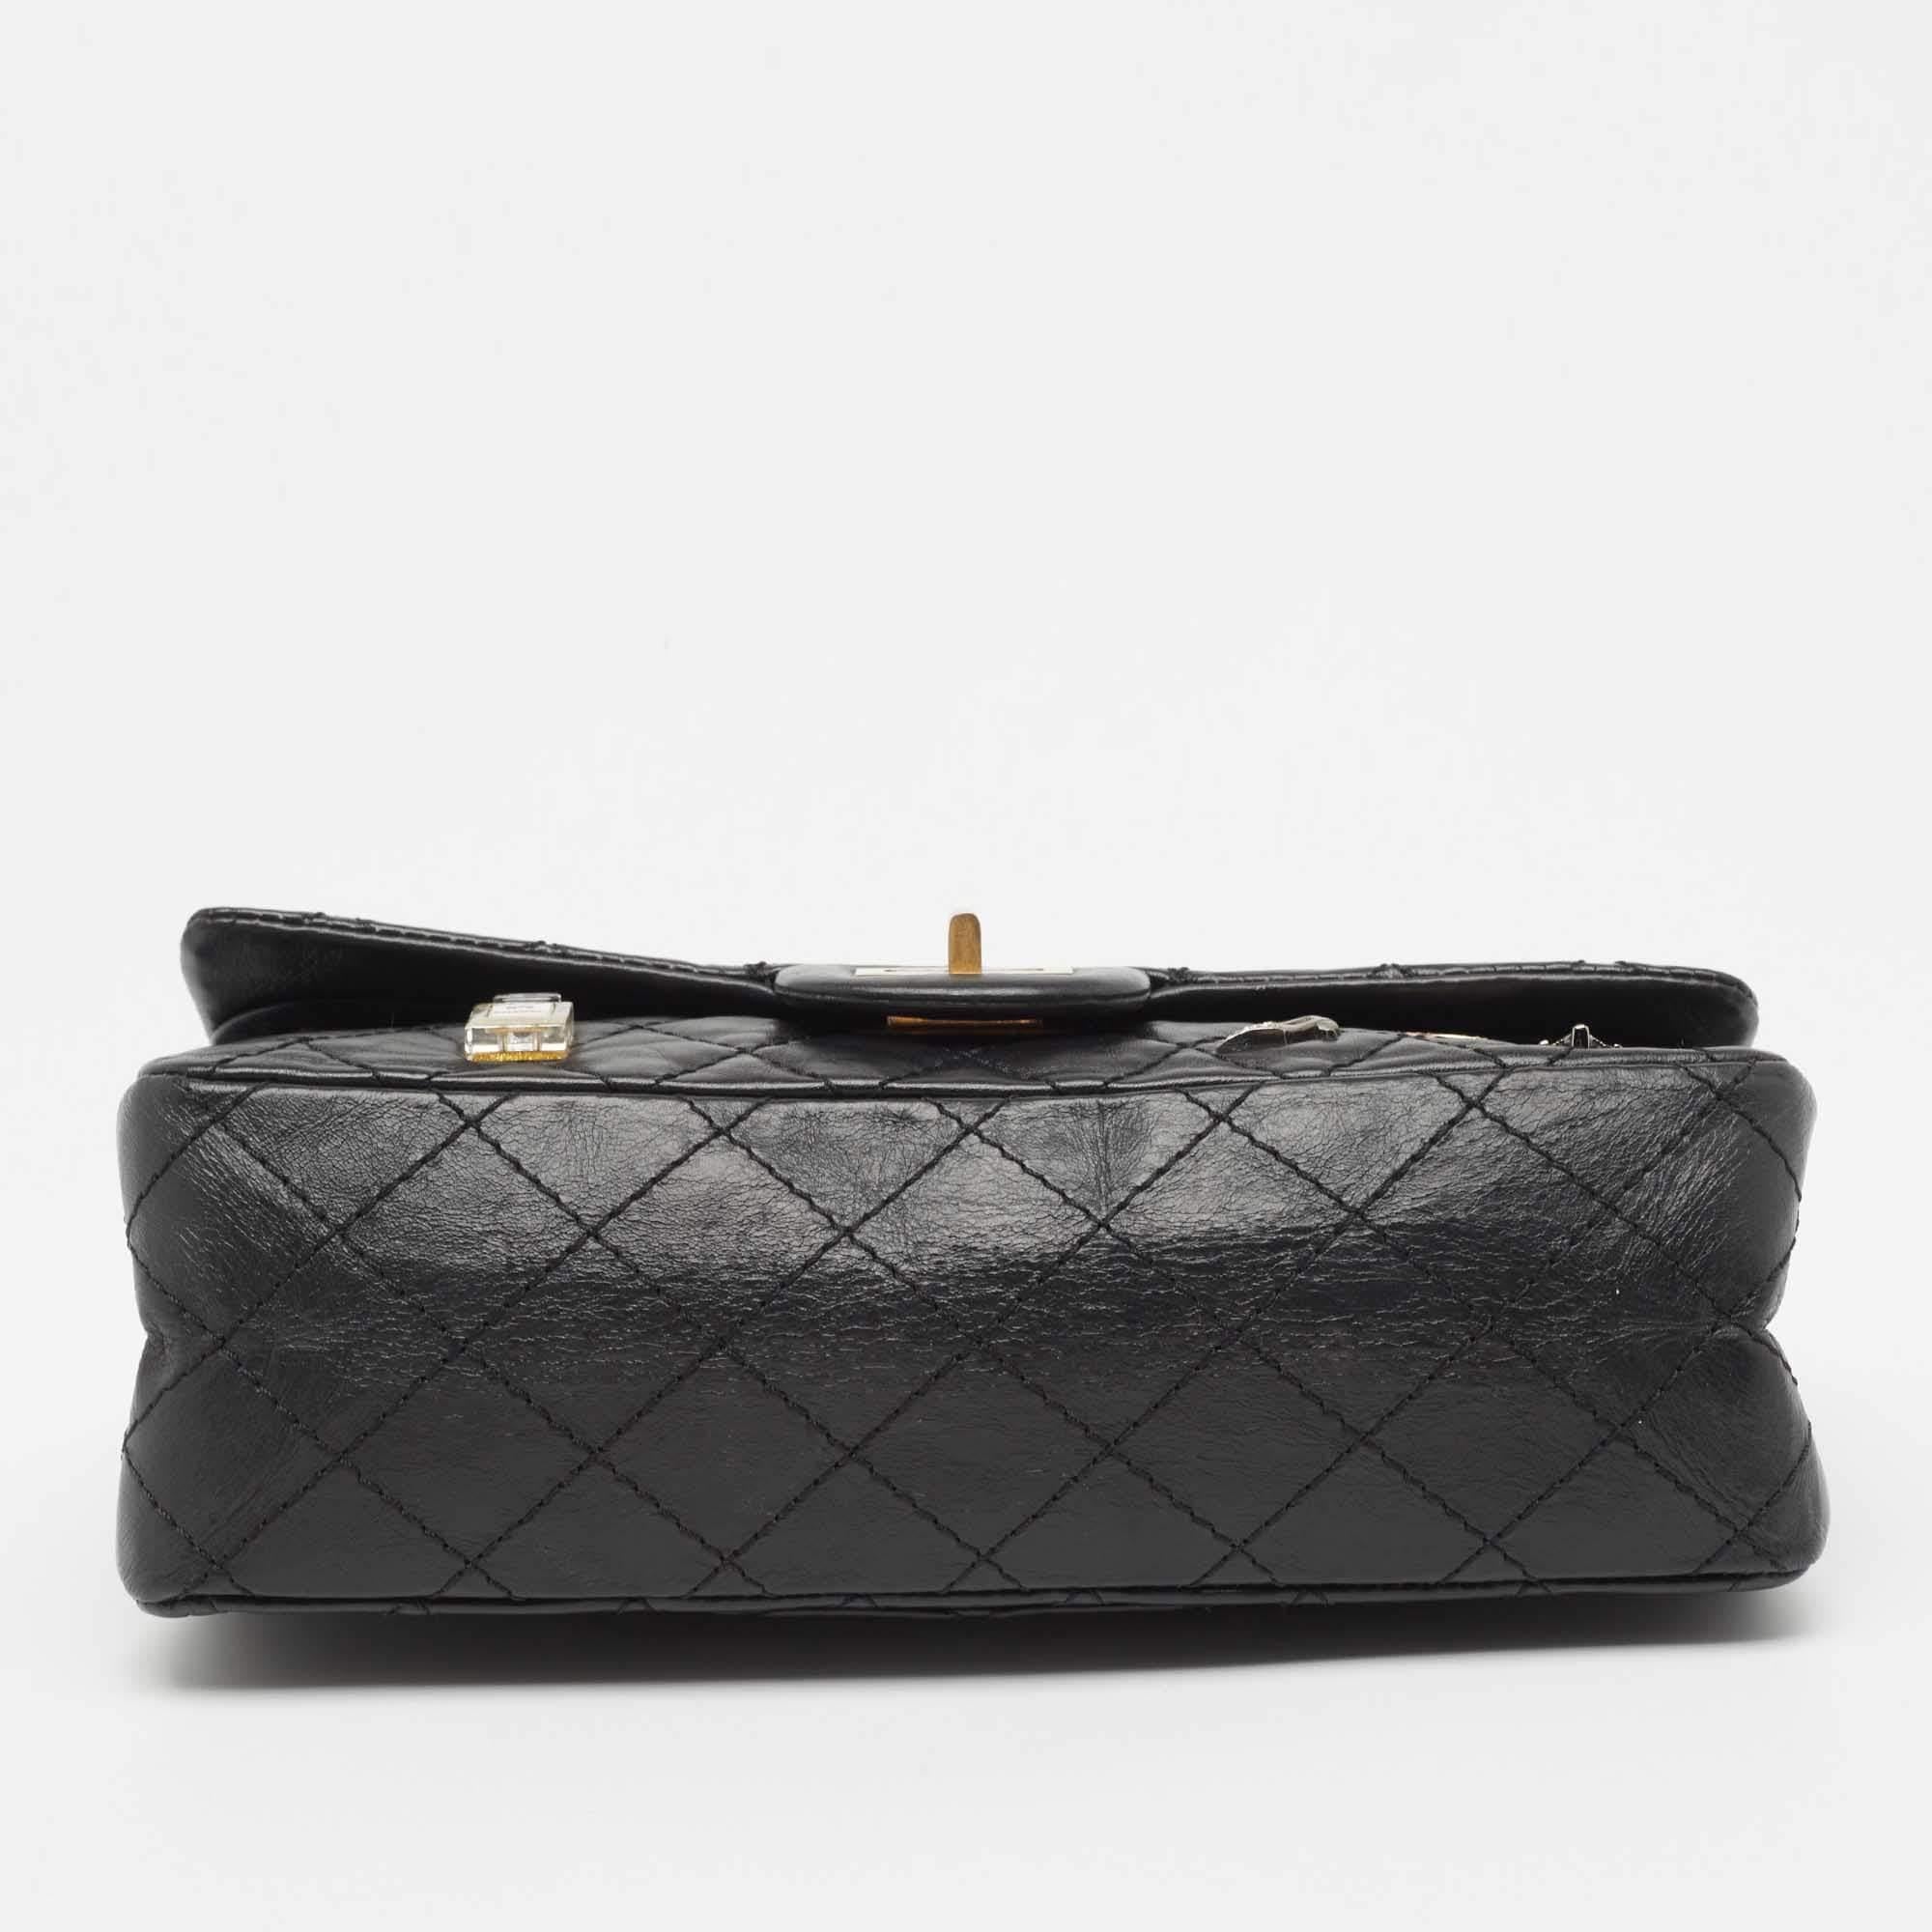 Chanel Black Quilted Aged Leather 225 Lucky Charm Reissue 2.55 Flap Bag For Sale 1